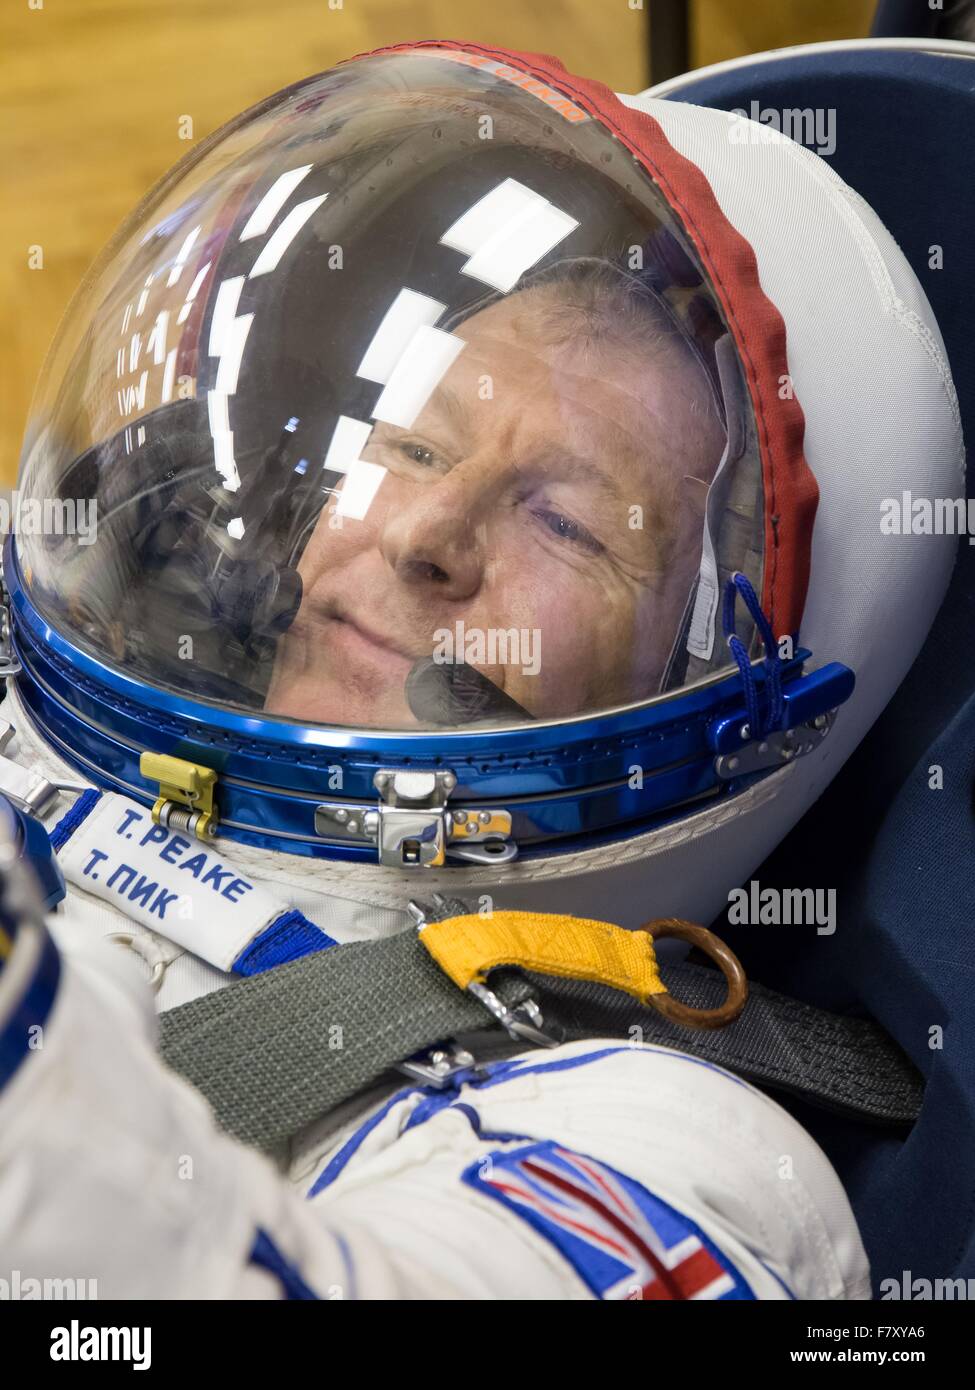 International Space Station Expedition 46 crew member European Space Agency astronaut Tim Peake is fitted into his Russian Sokol spacesuit at the Gagarin Space Center December 1, 2015 in Star City, Russia. The Expedition 46 crew launch December 15 for a six-month mission on the International Space Station. Stock Photo